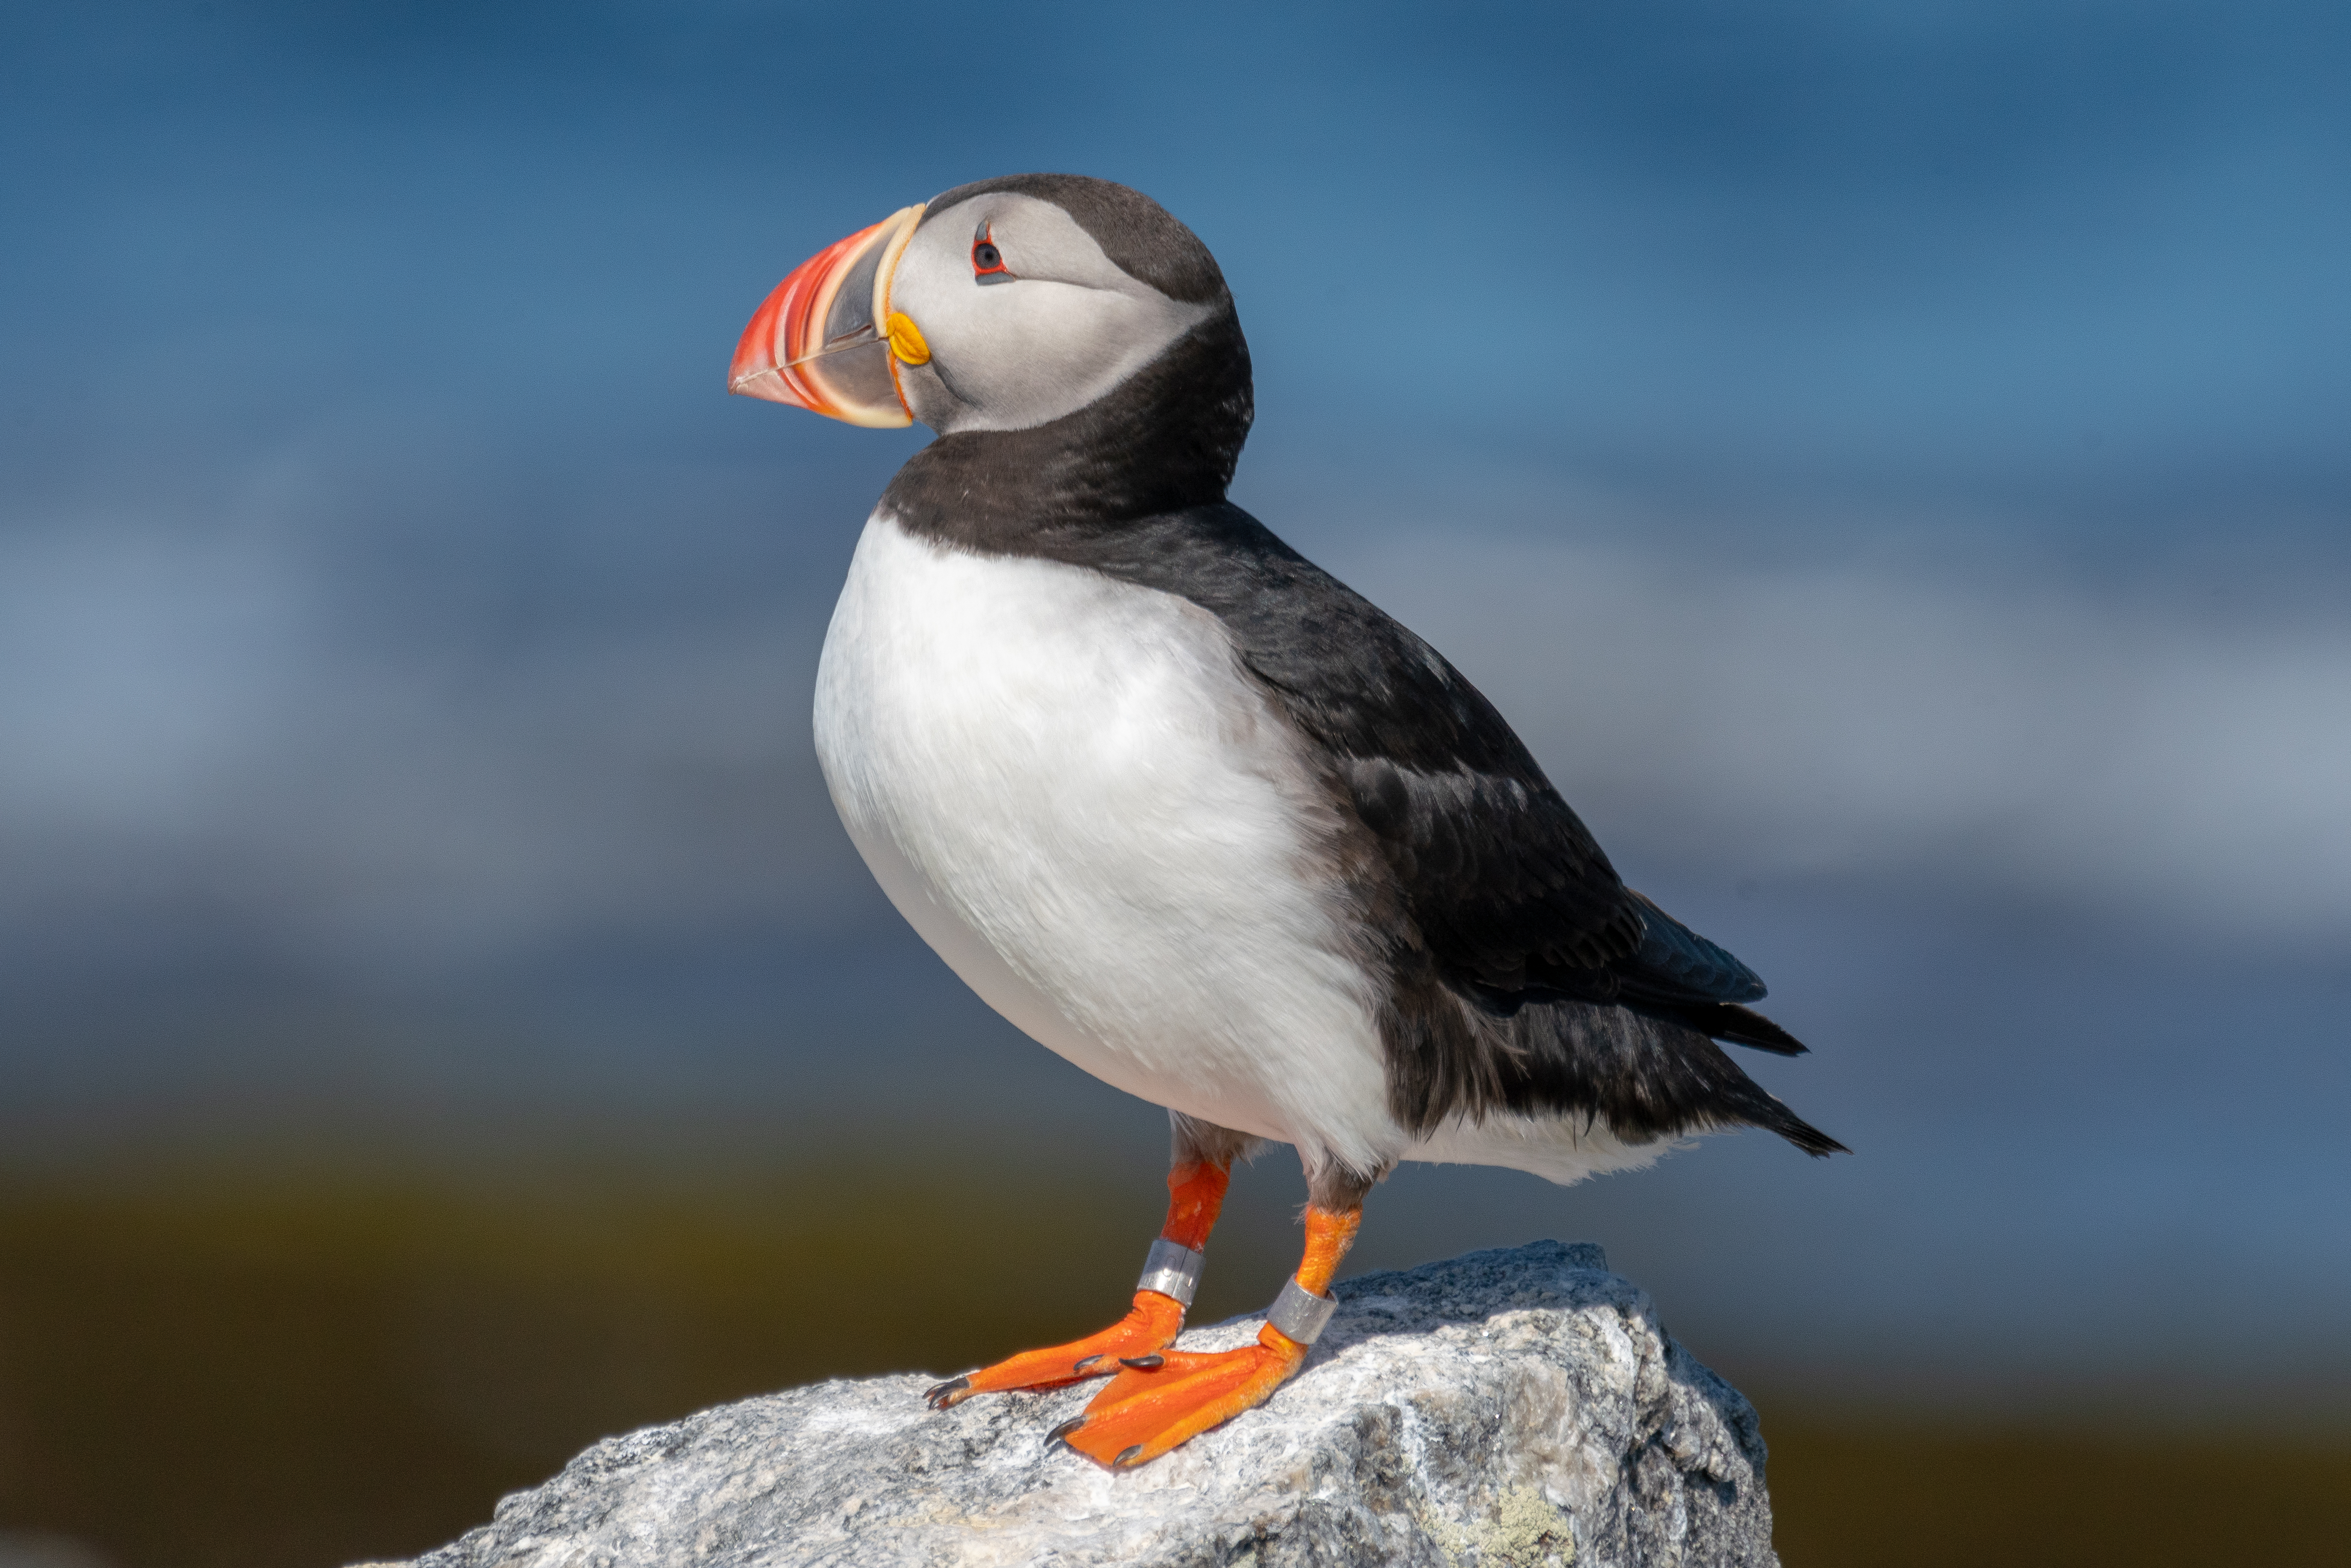 A puffin on Eastern Egg Rock.